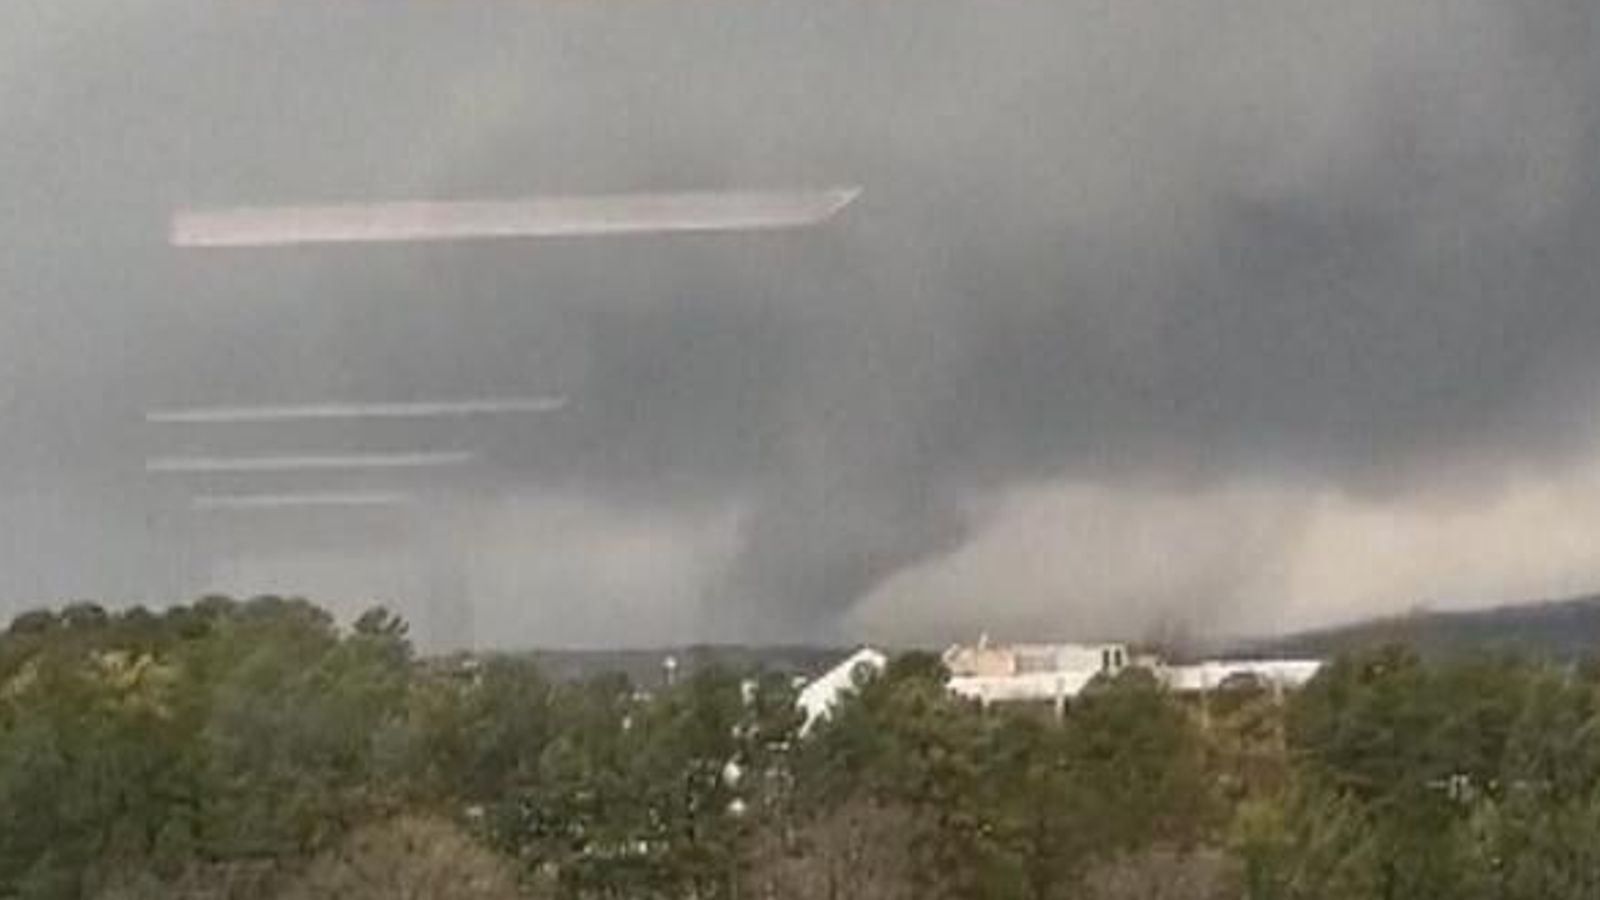 US tornadoes: Three dead and dozens injured as twisters causes widespread destruction including roof collapse during concert